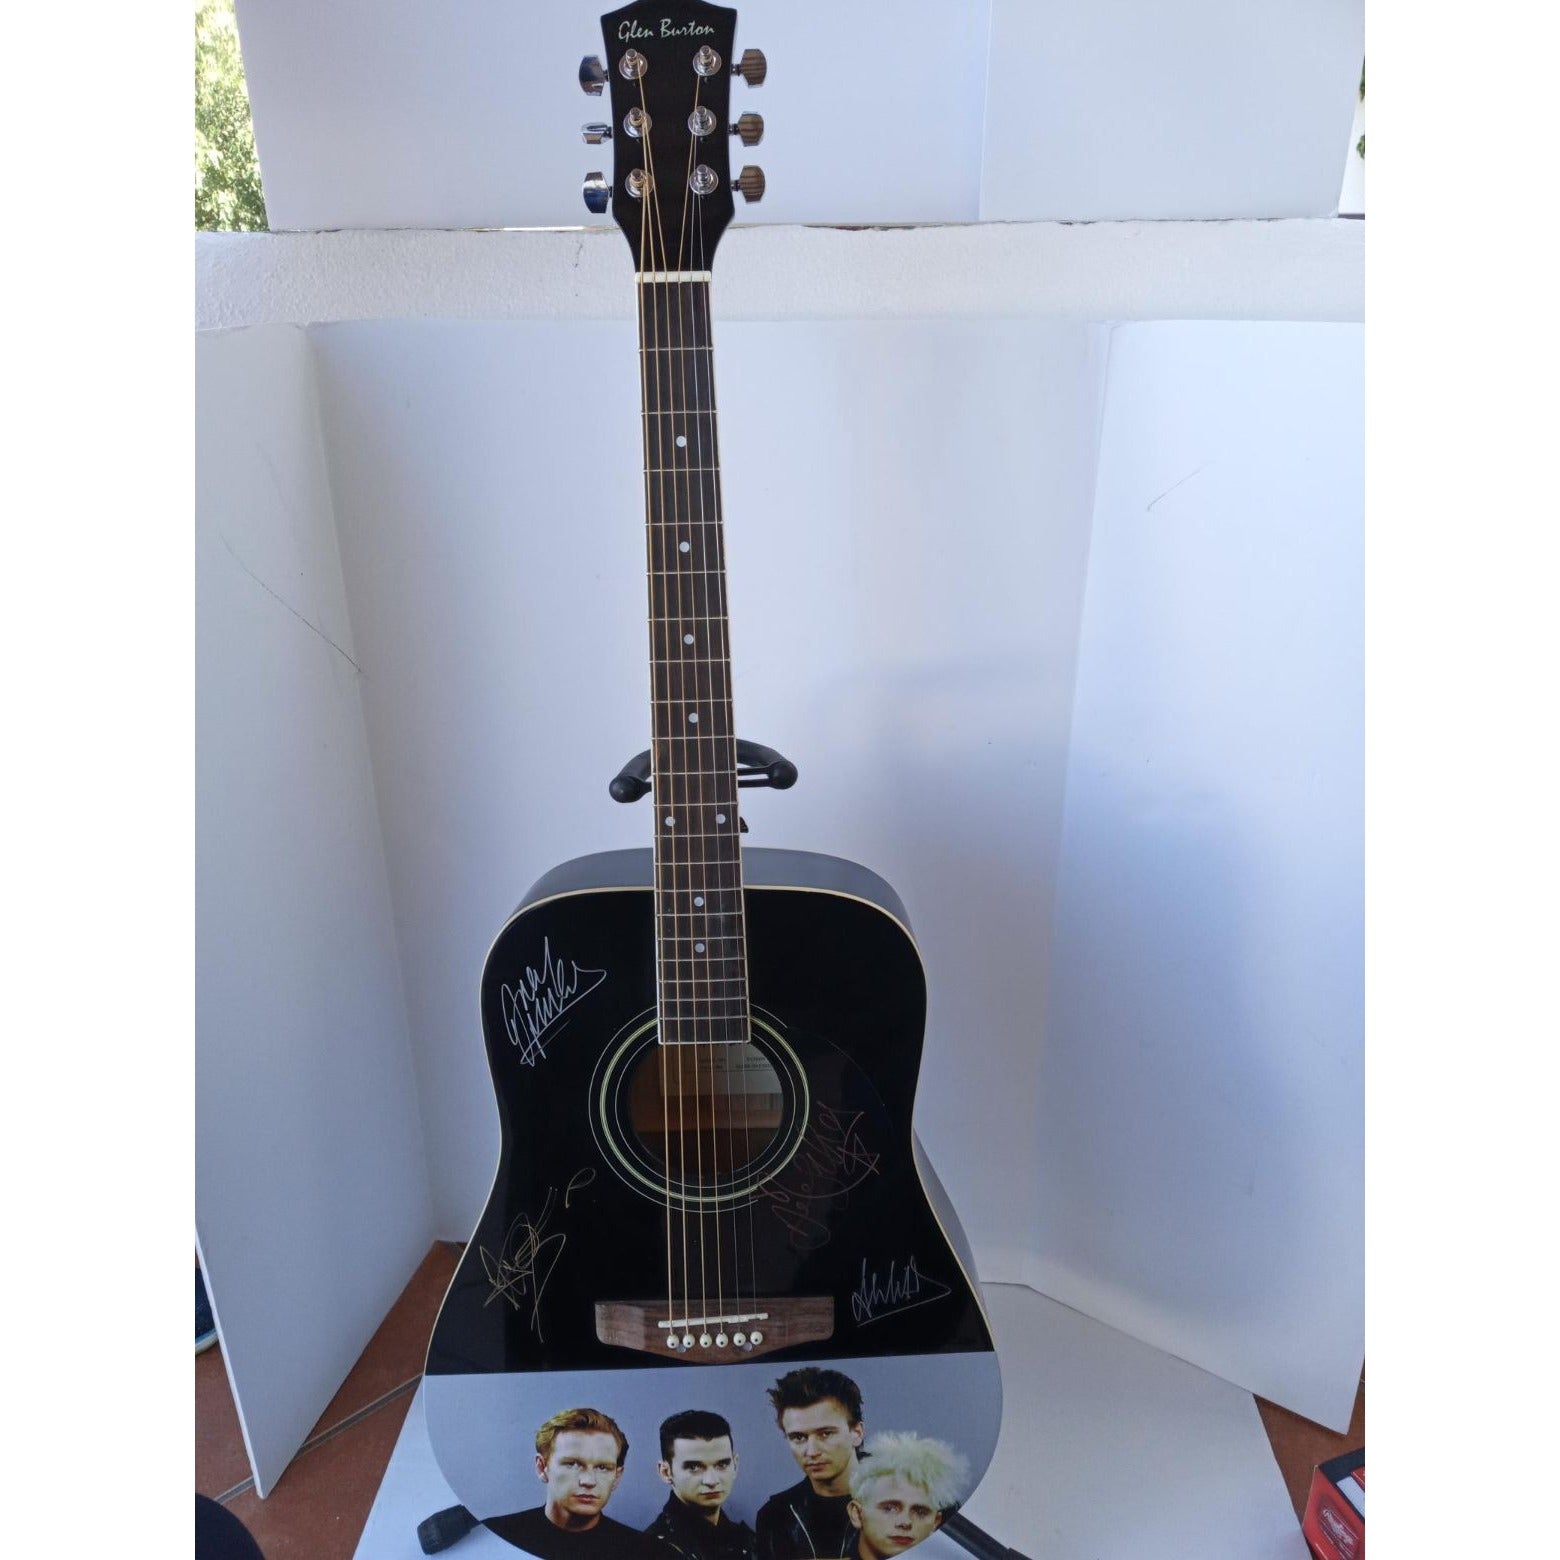 Depeche Mode David Gahan Martin Gore Andy Fletcher Alan Wilder One of a Kind full size acoustic guitar signed with proof